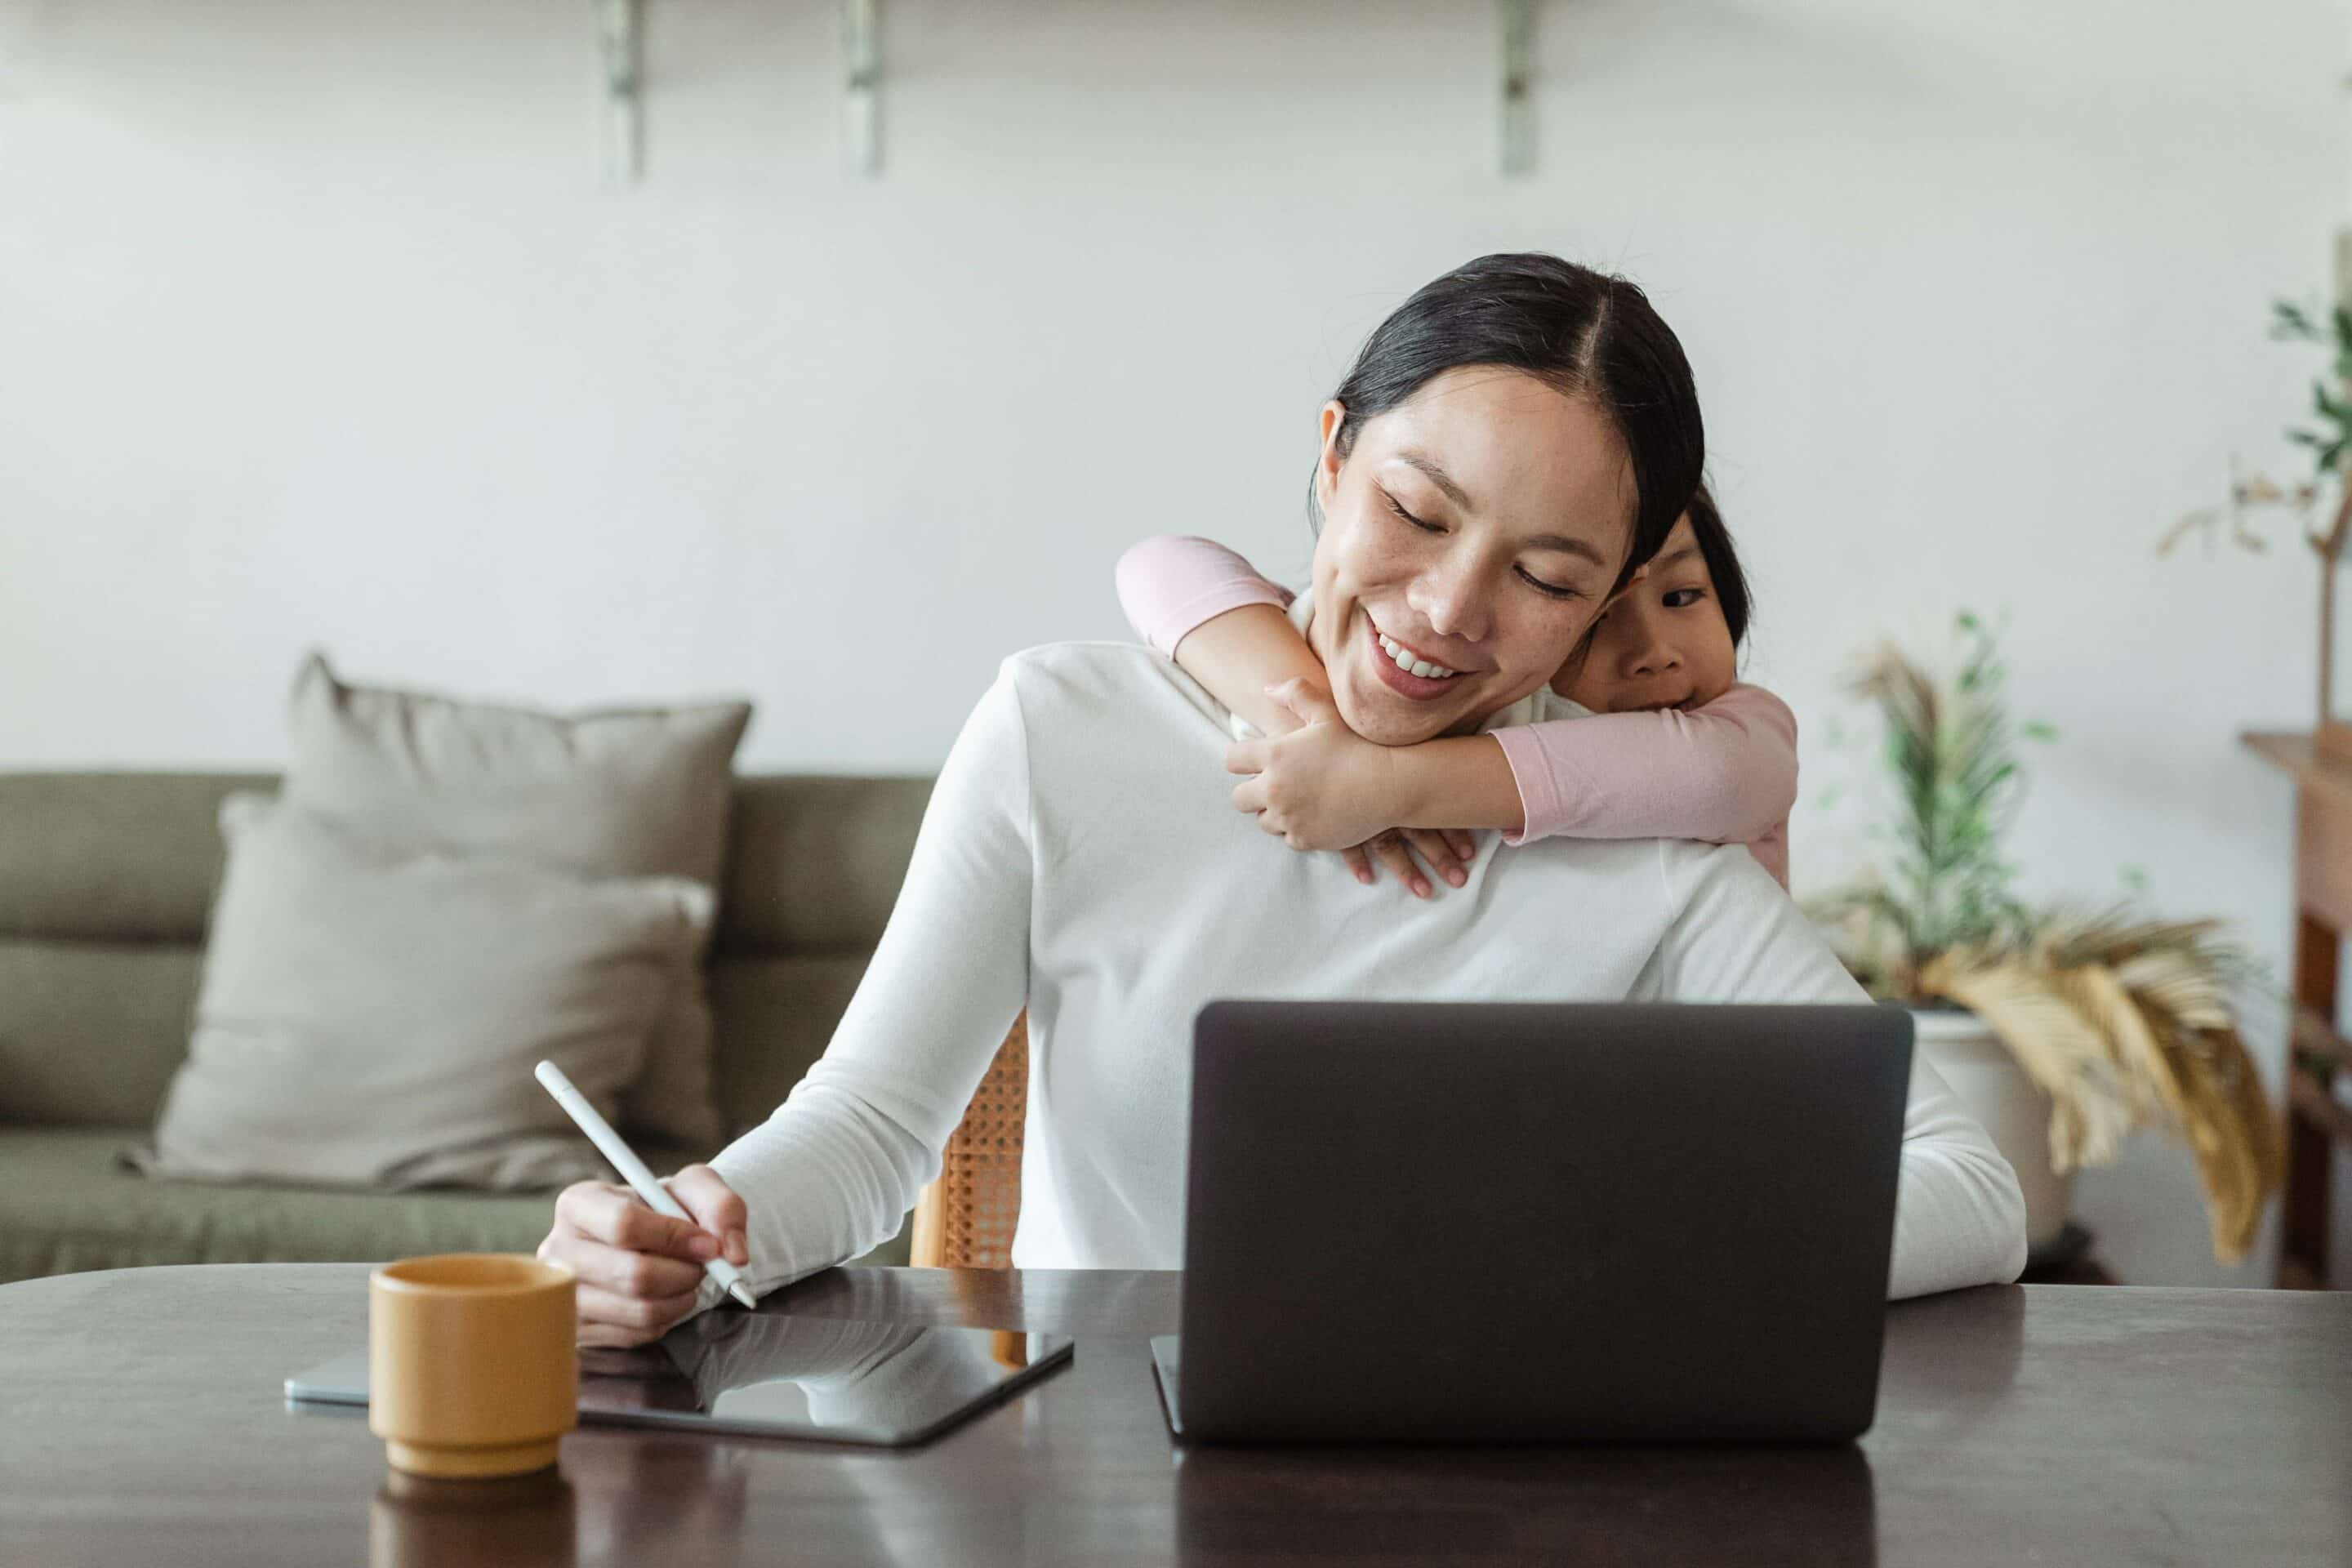 Smiling woman enjoying the benefits of flexible working while working from home with her child.